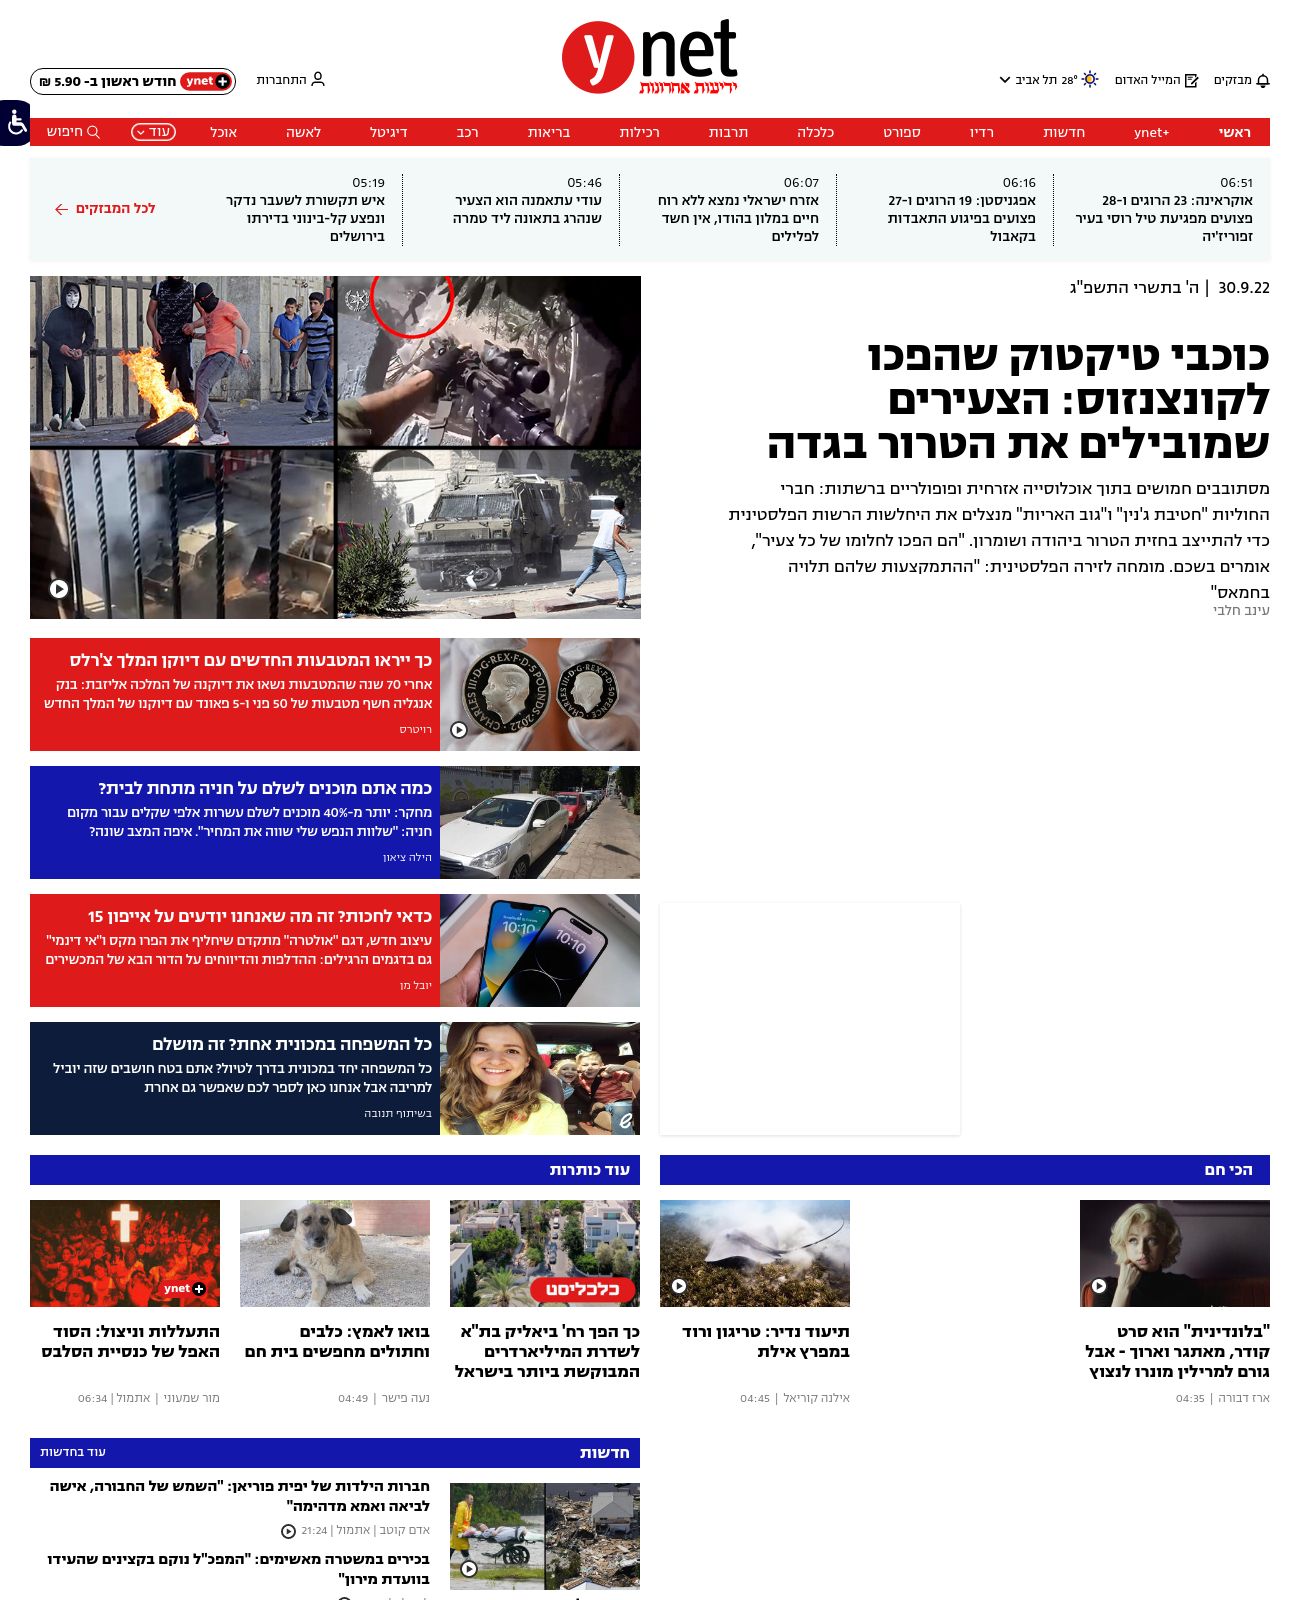 Ynet at 2022-09-30 11:16:07+03:00 local time